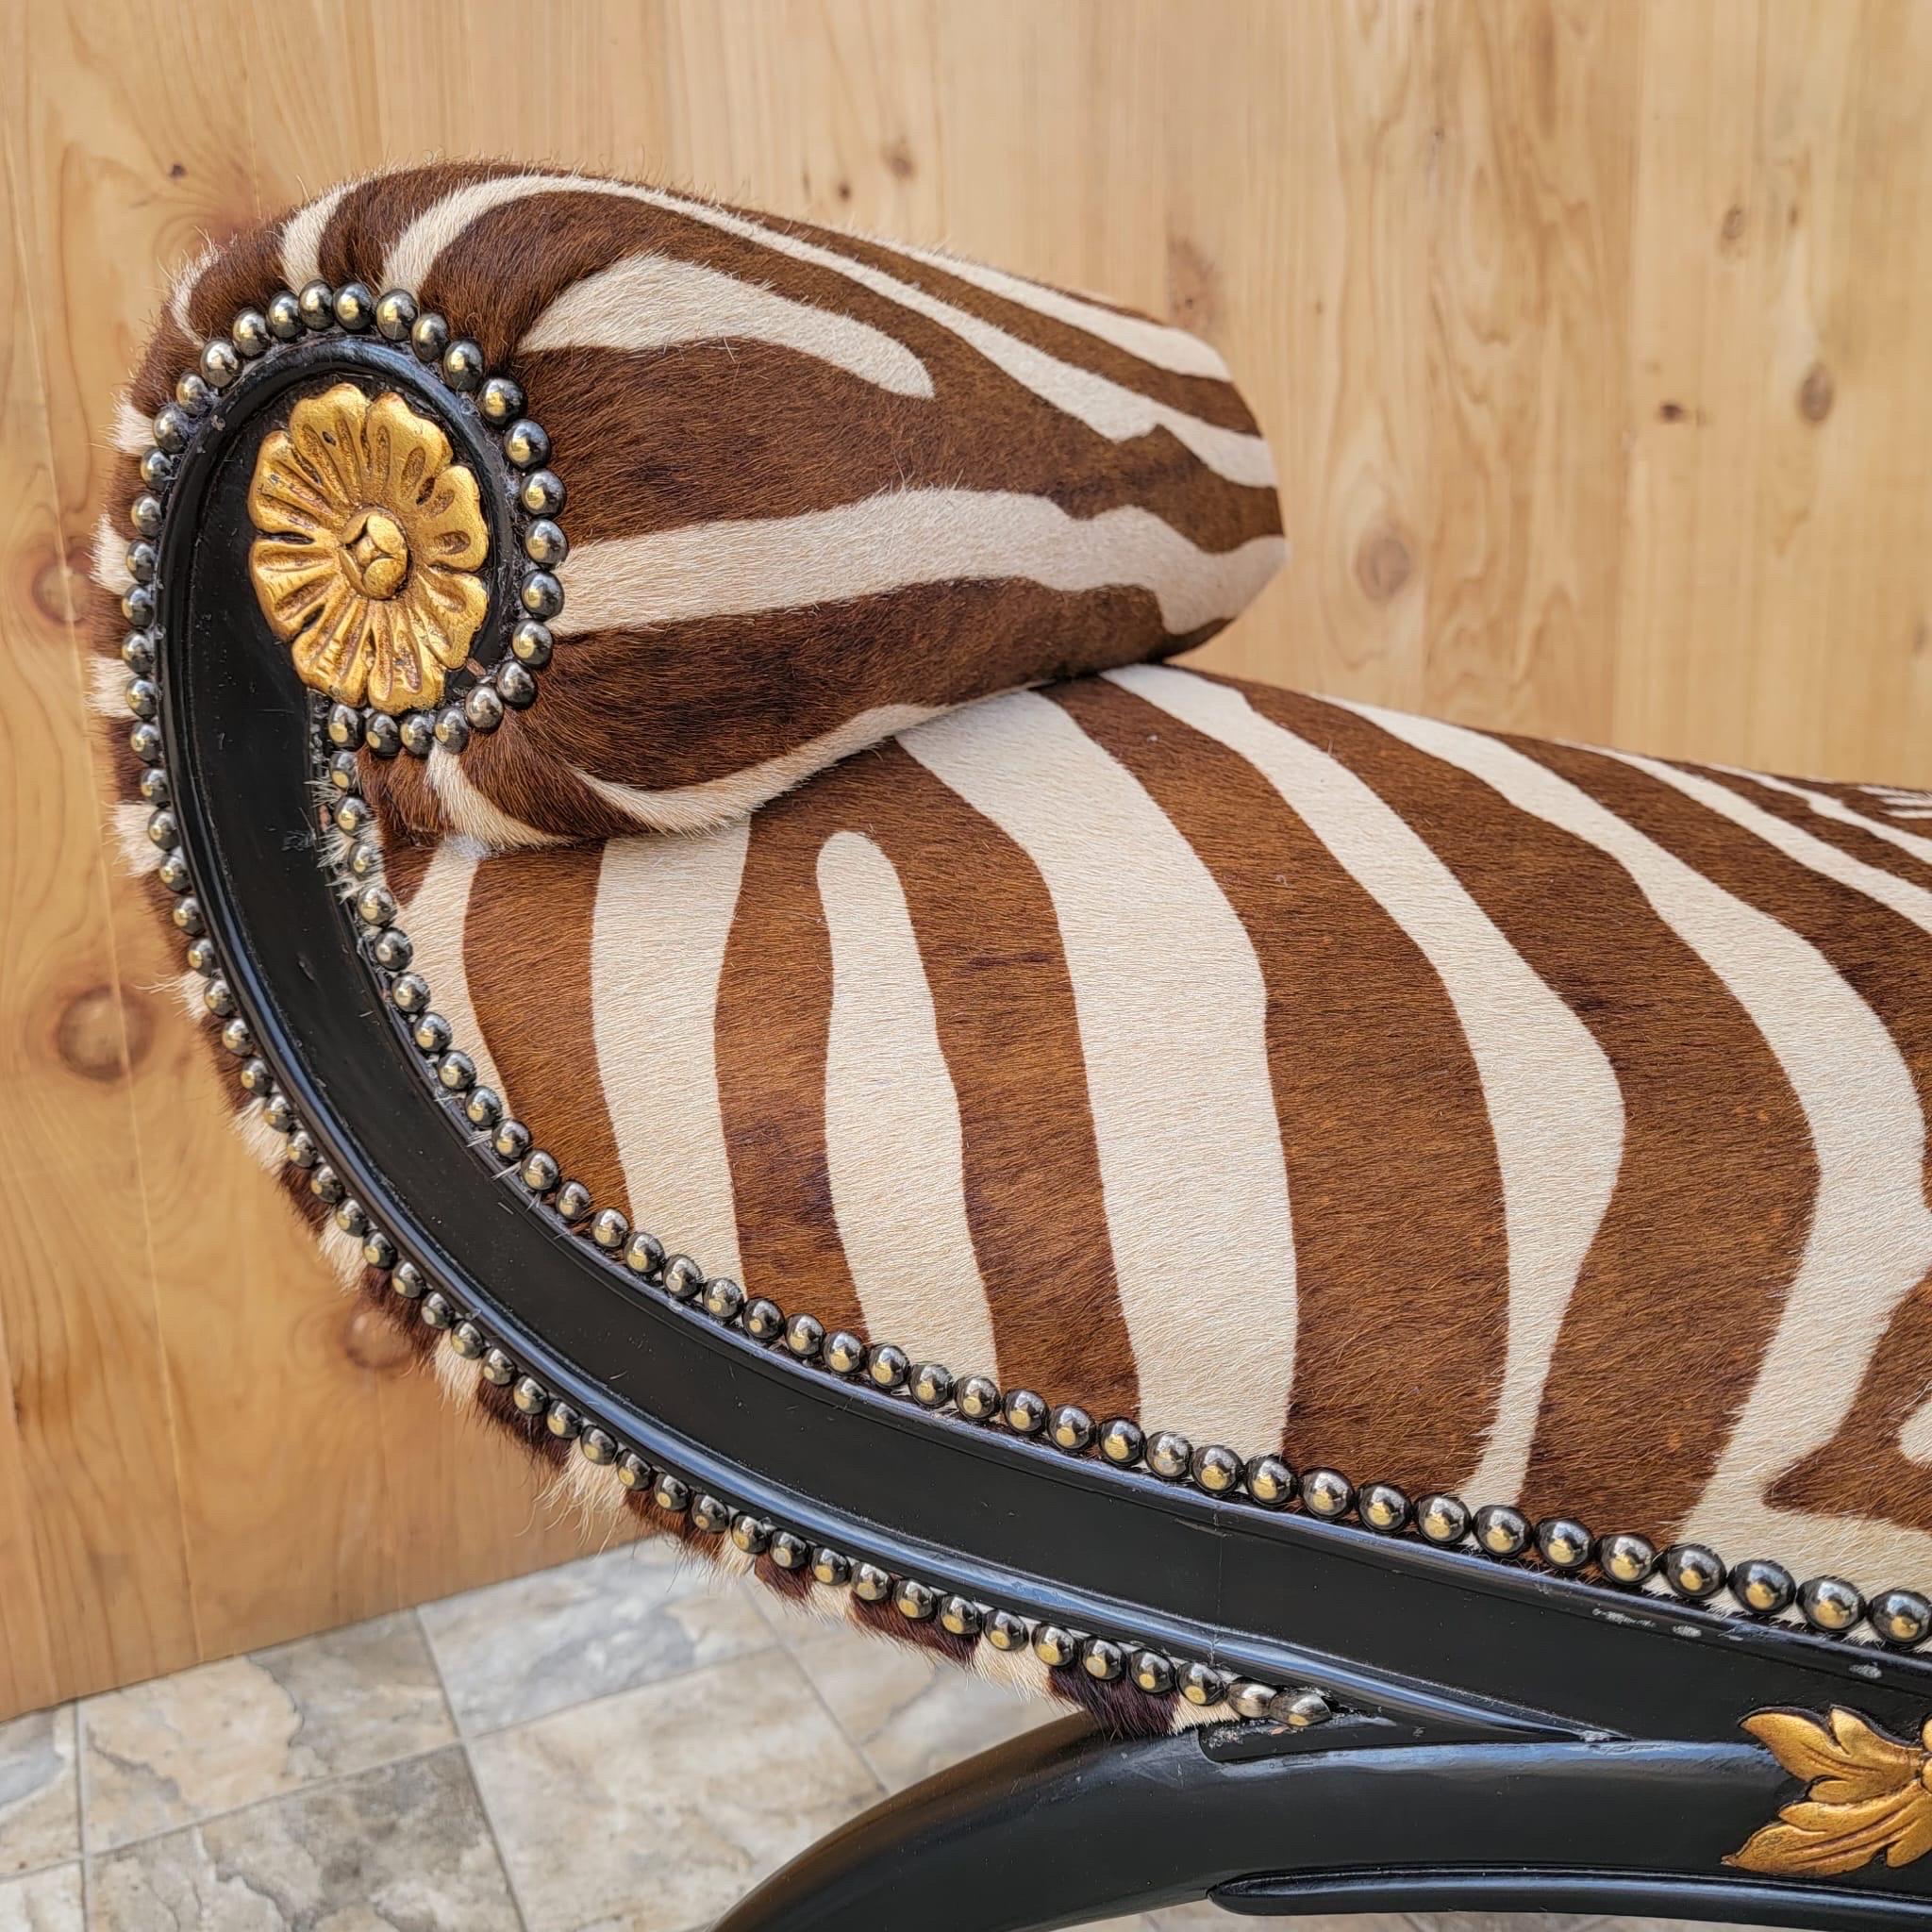 Regency style ebonized and gilded wood scroll-arm zebra striped Brazilian cowhide bench.

Beautiful 19th century regency style ebonized bowed leg, scroll-arm vanity bench, newly upholstered in a zebra striped brazilian hair-on hide. 

Circa 19th